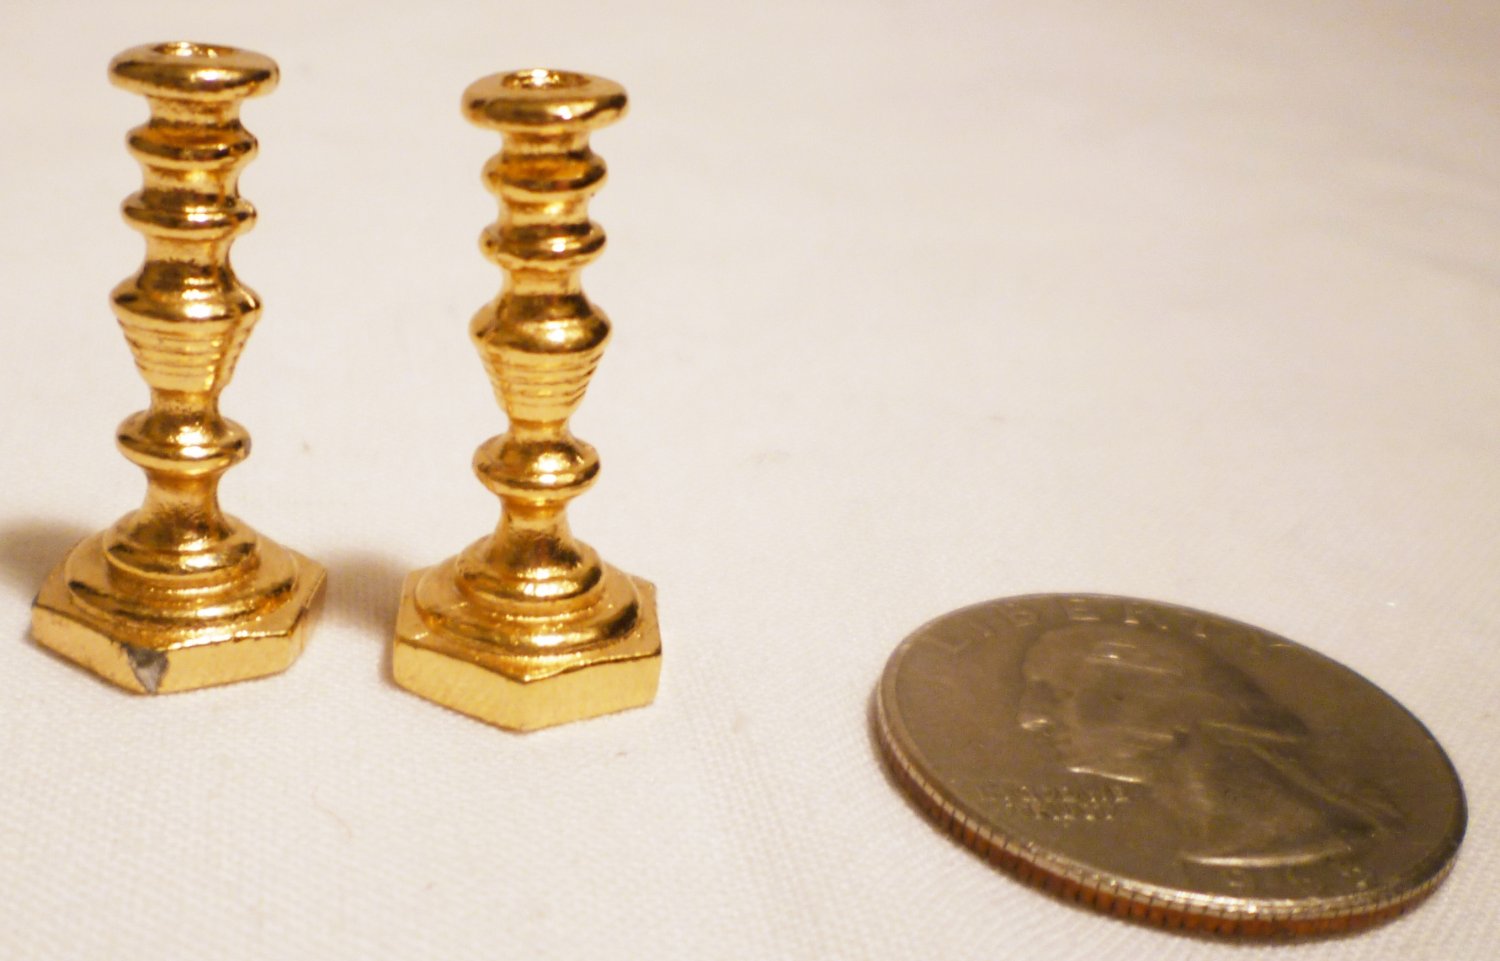 VINTAGE SOLID BRASS MINIATURE DOLLHOUSE CANDLE HOLDERS STICKS SET OF 2